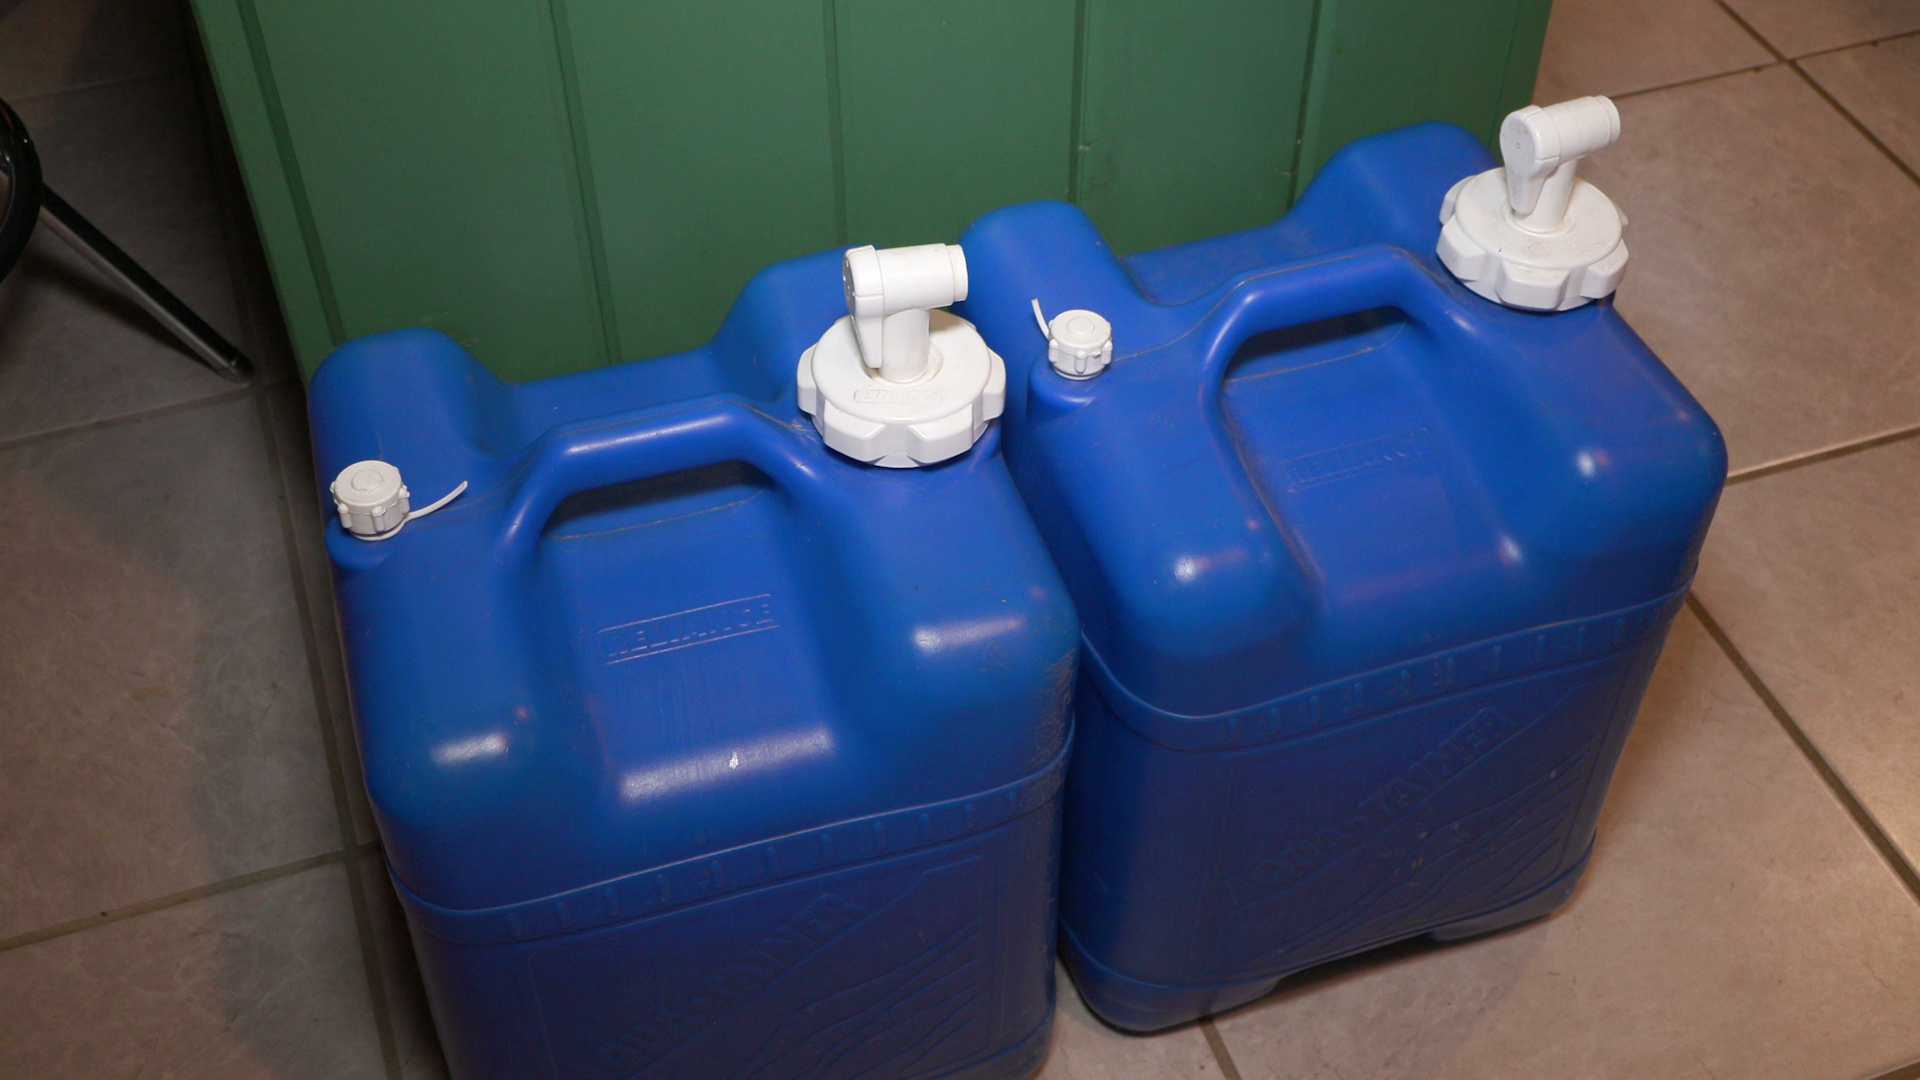 Two 7-gallon water jugs sit on a tile floor.